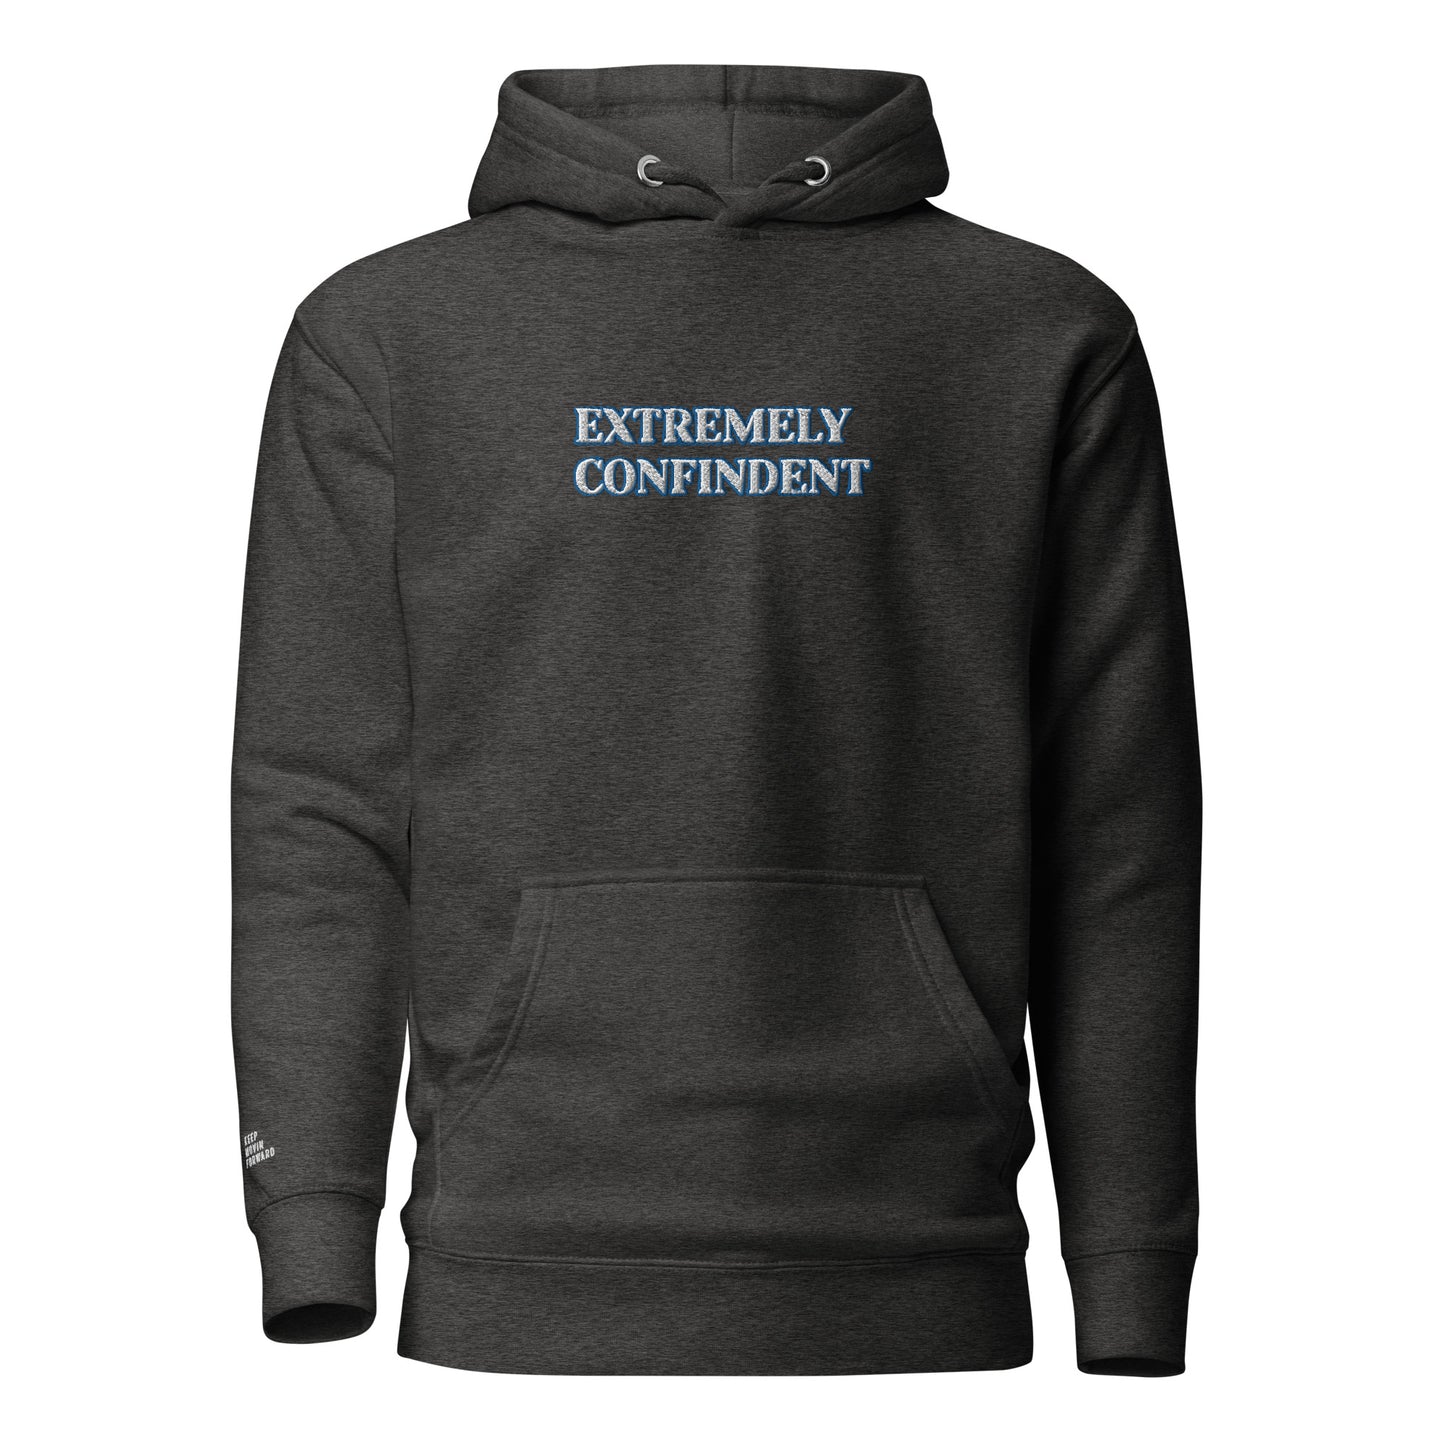 KMF Extremely Confident Hoodie